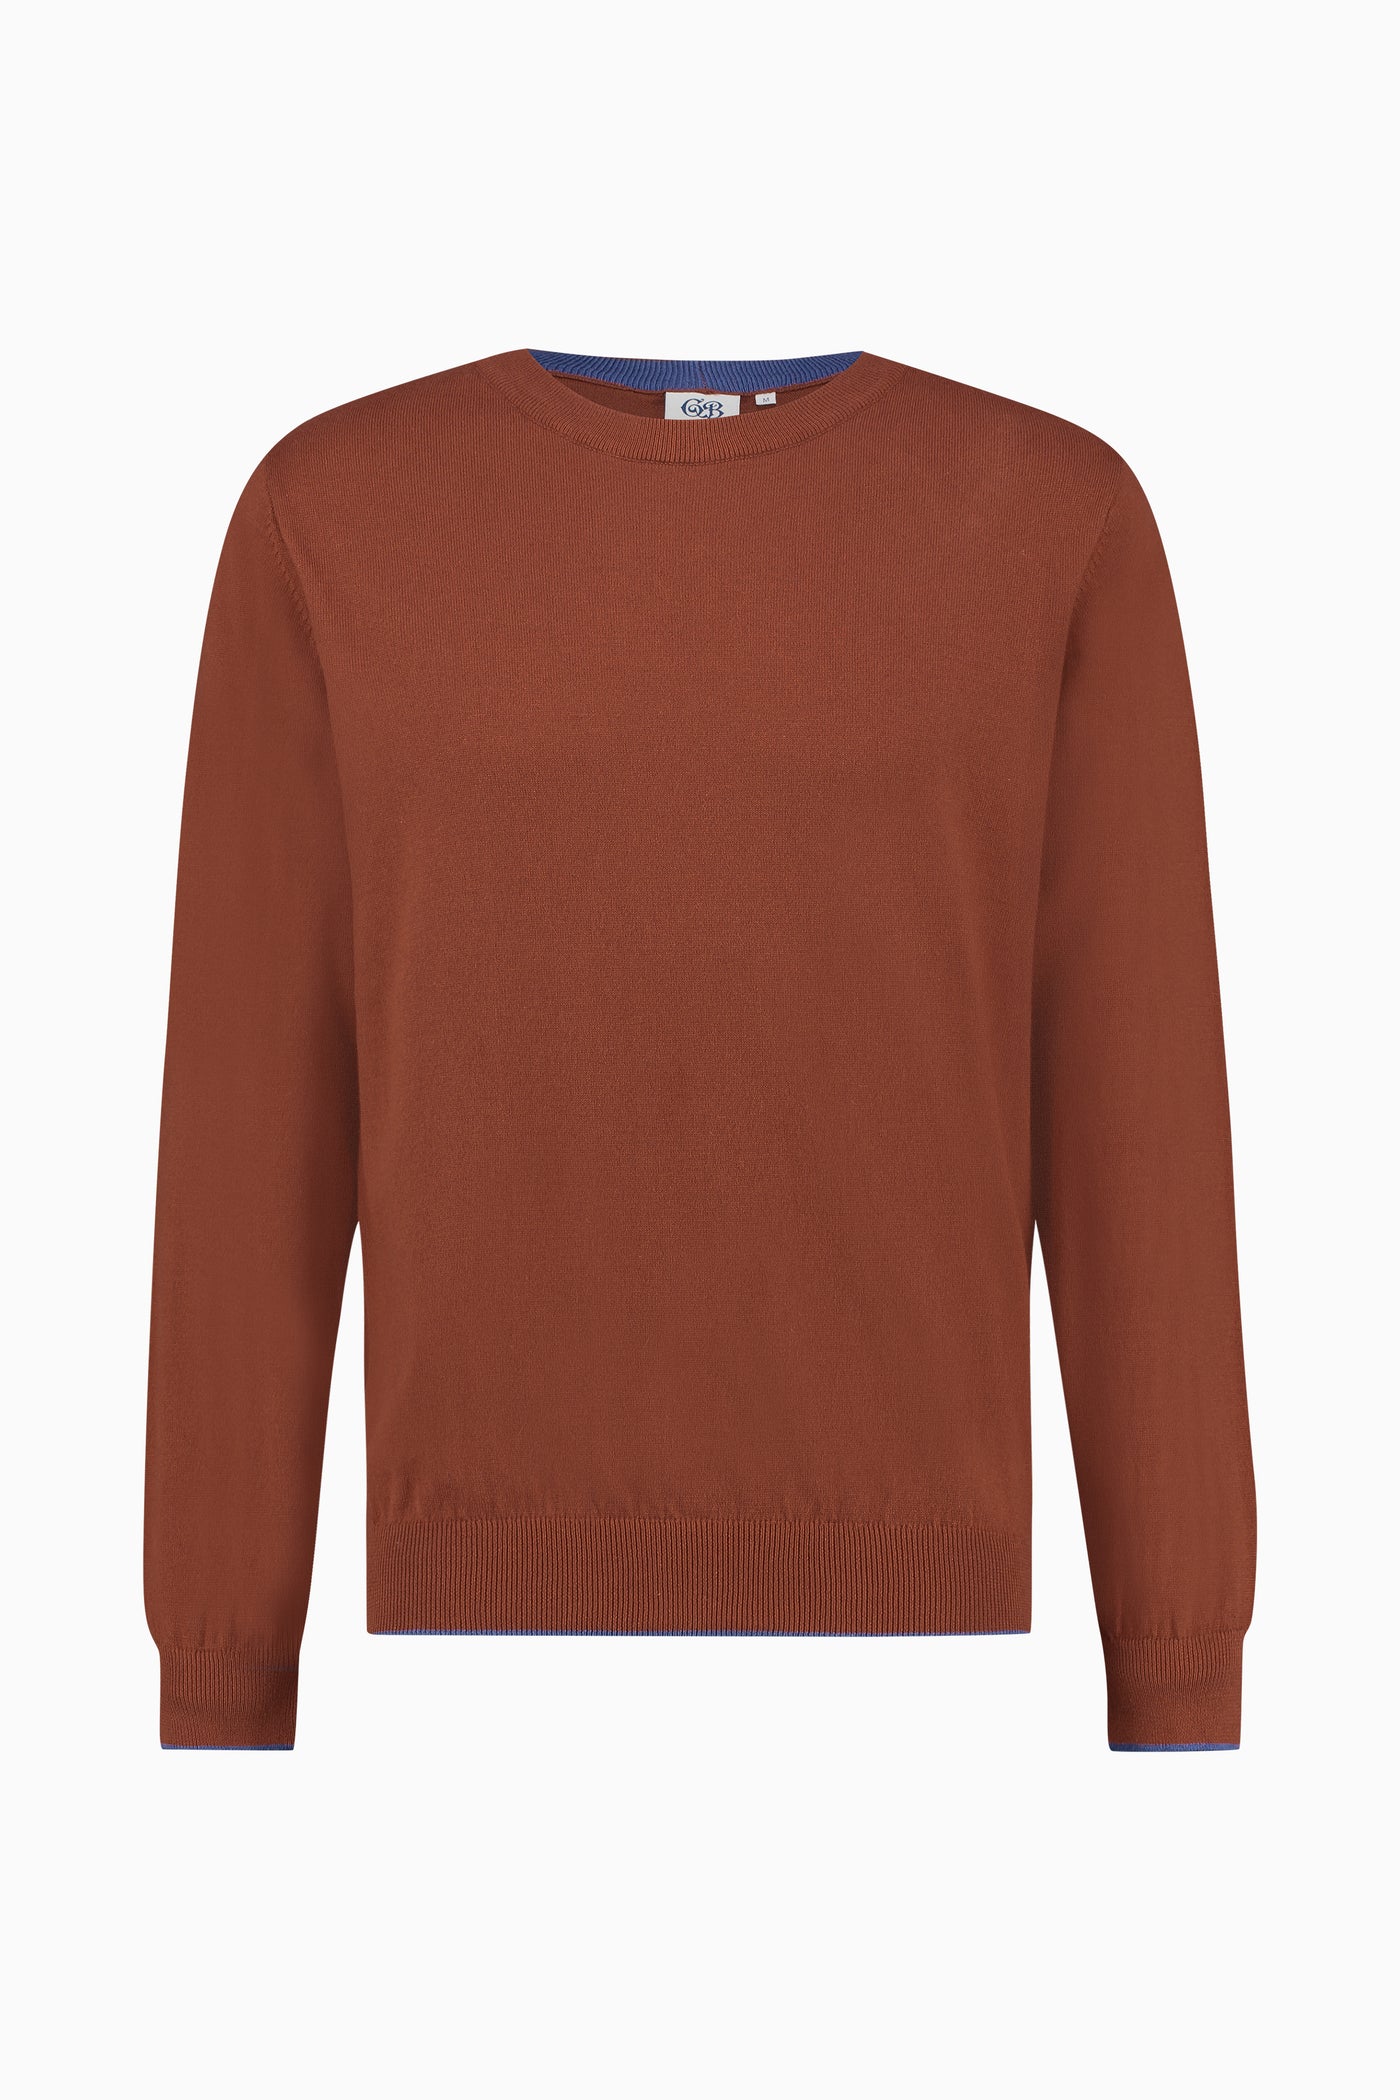 Curved Knit Brown Cotton/Cashmere